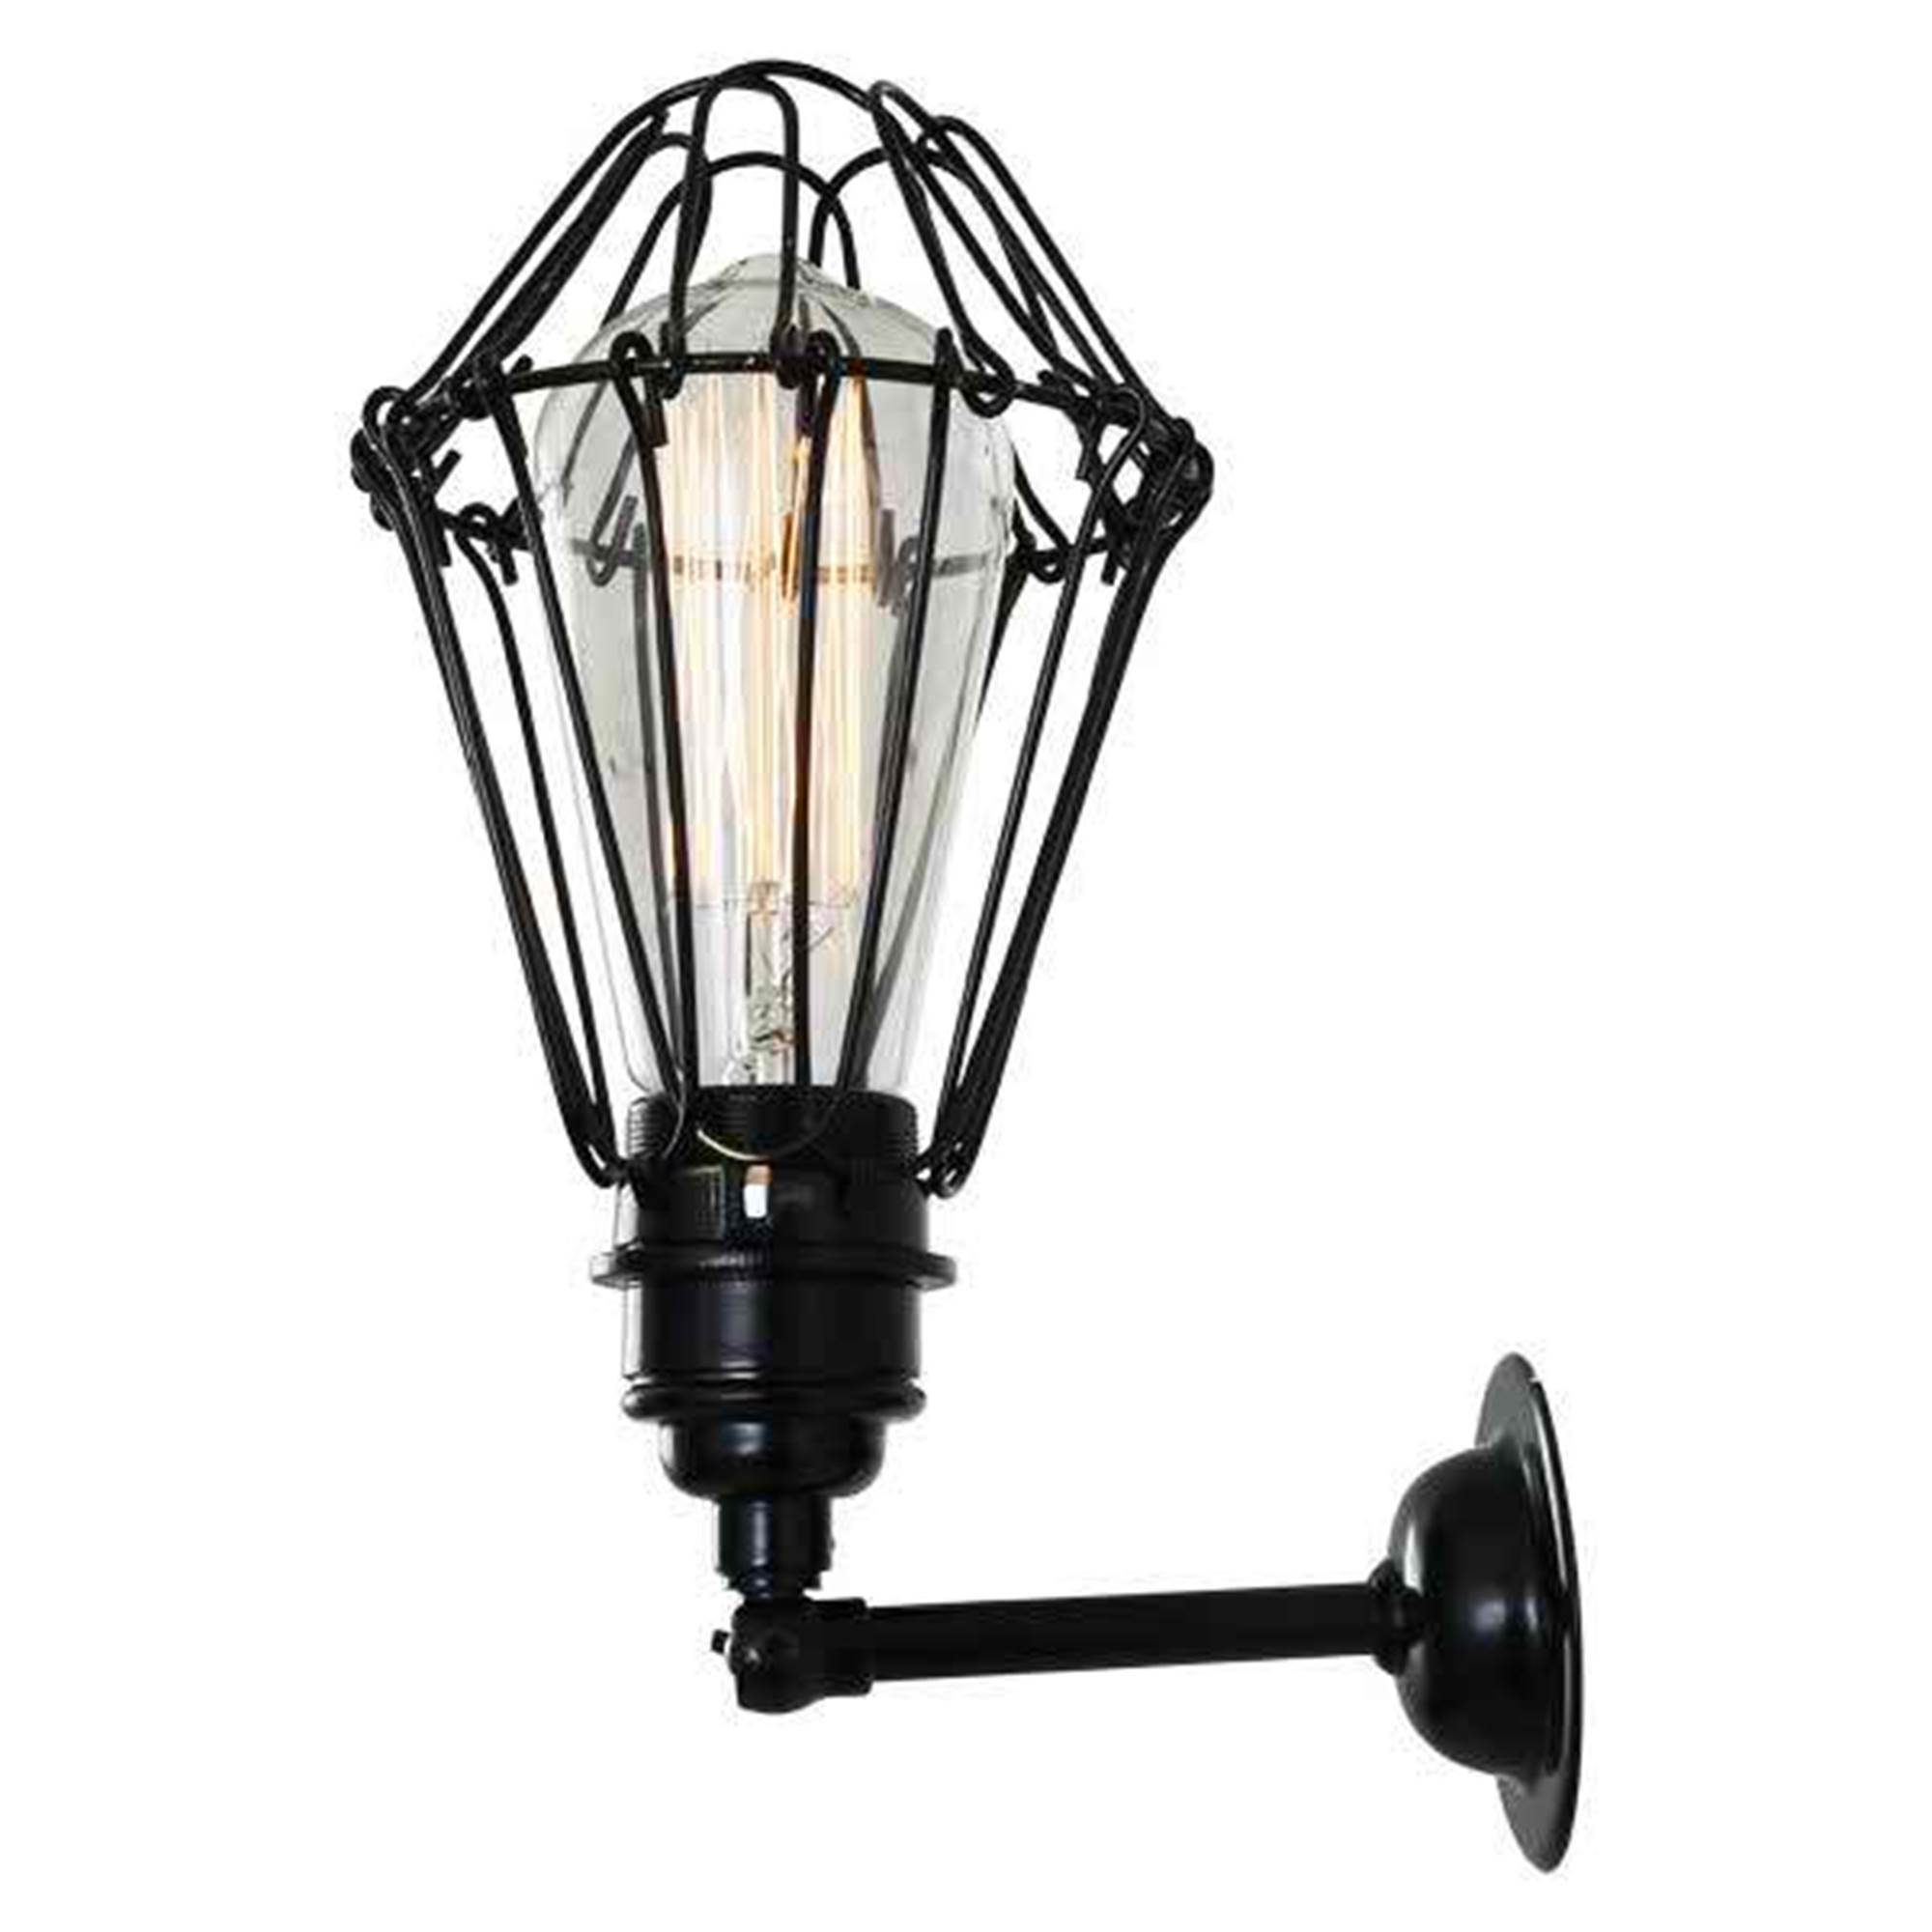 Mullan Lighting Cotonou Wall Light with Industrial Cage - Black